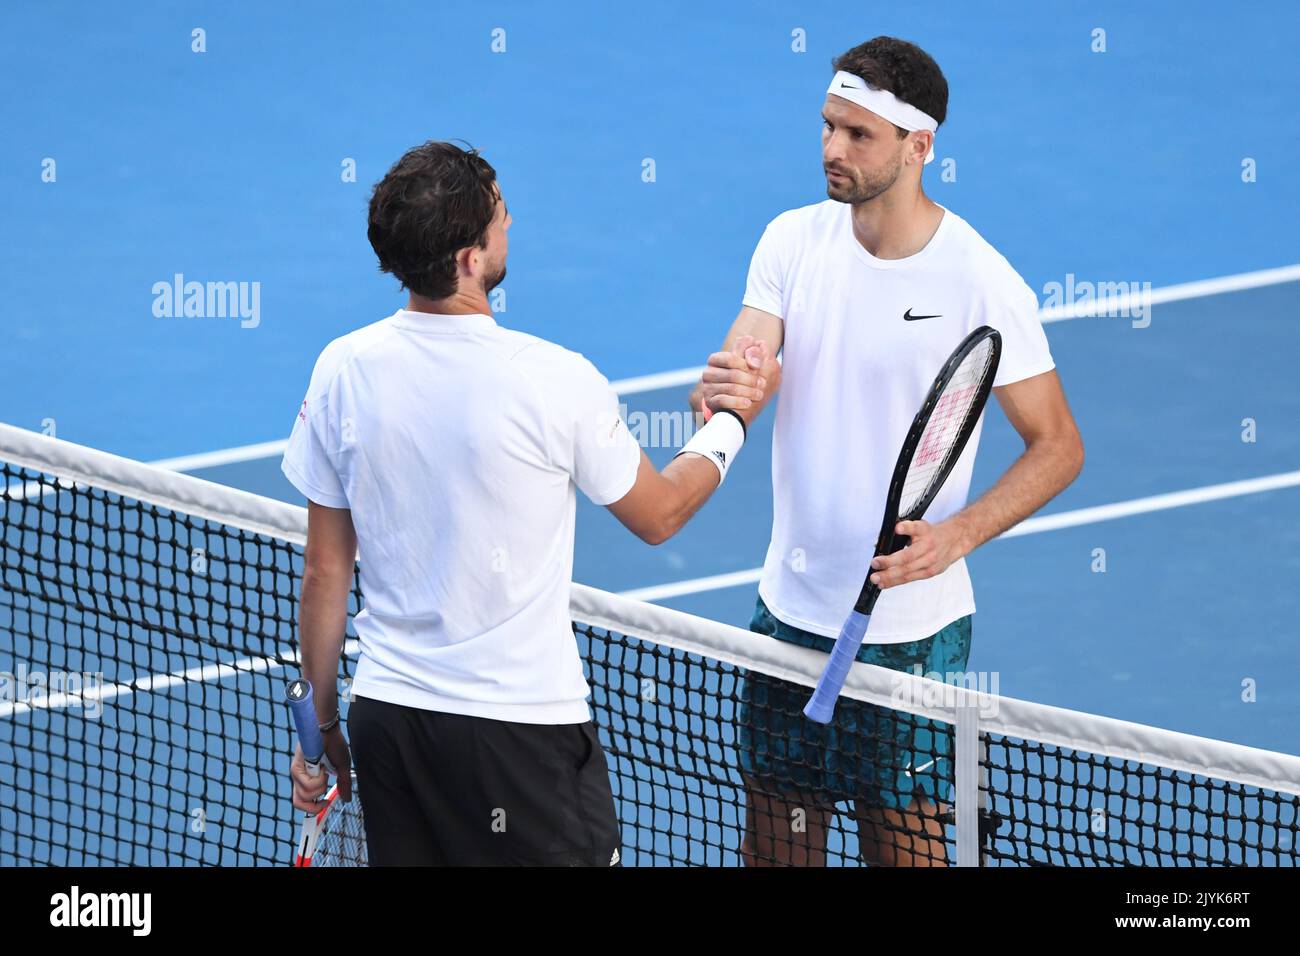 Grigor Dimitrov (R) of Bulgaria shakes hands with Dominic Thiem of Austria after winning his fourth Round Mens singles match on Day 7 of the Australian Open at Melbourne Park in Melbourne,